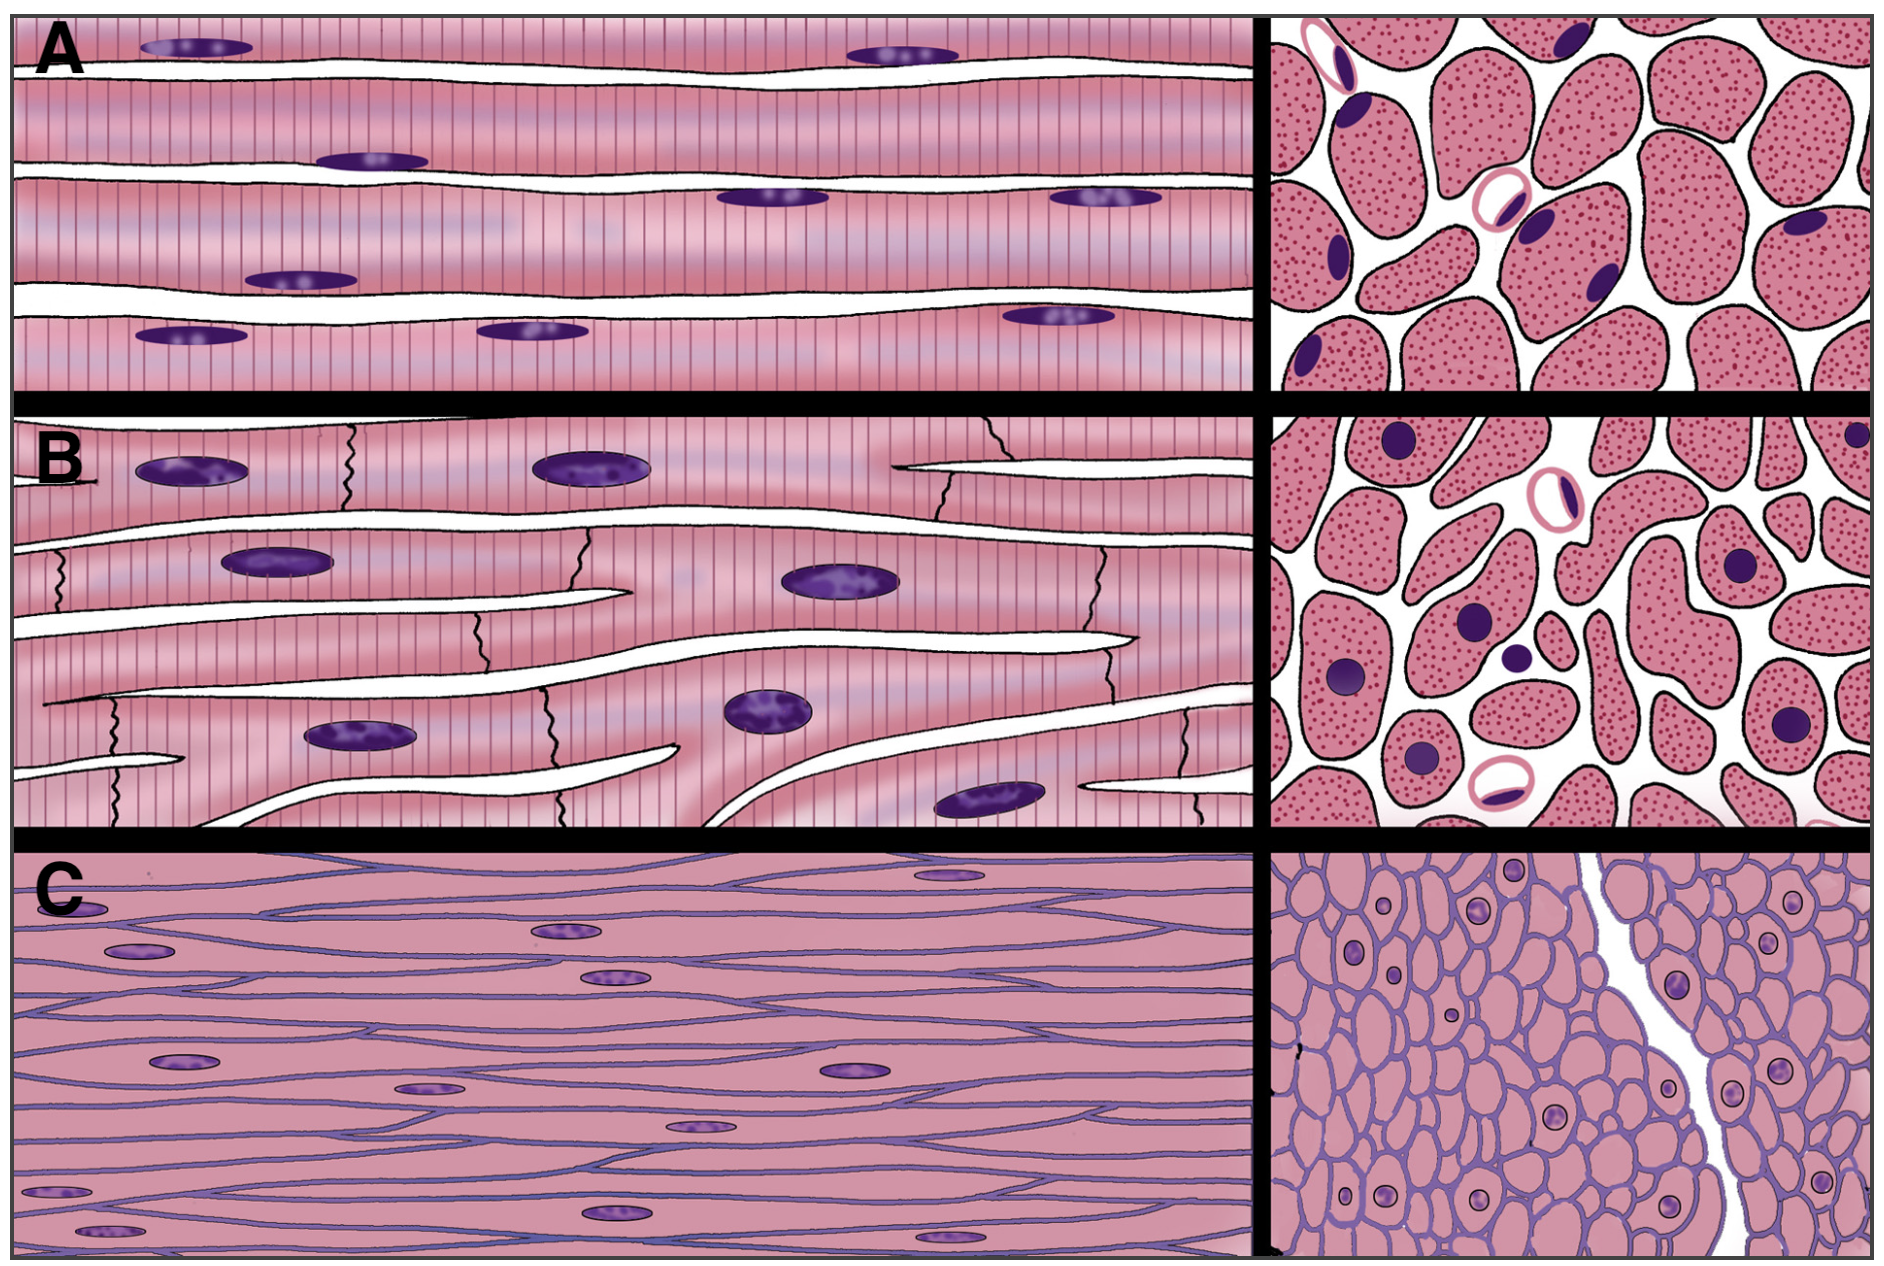 Comparison of muscle tissue types (illustration) - A. skeletal, B. cardiac, C. smooth.png